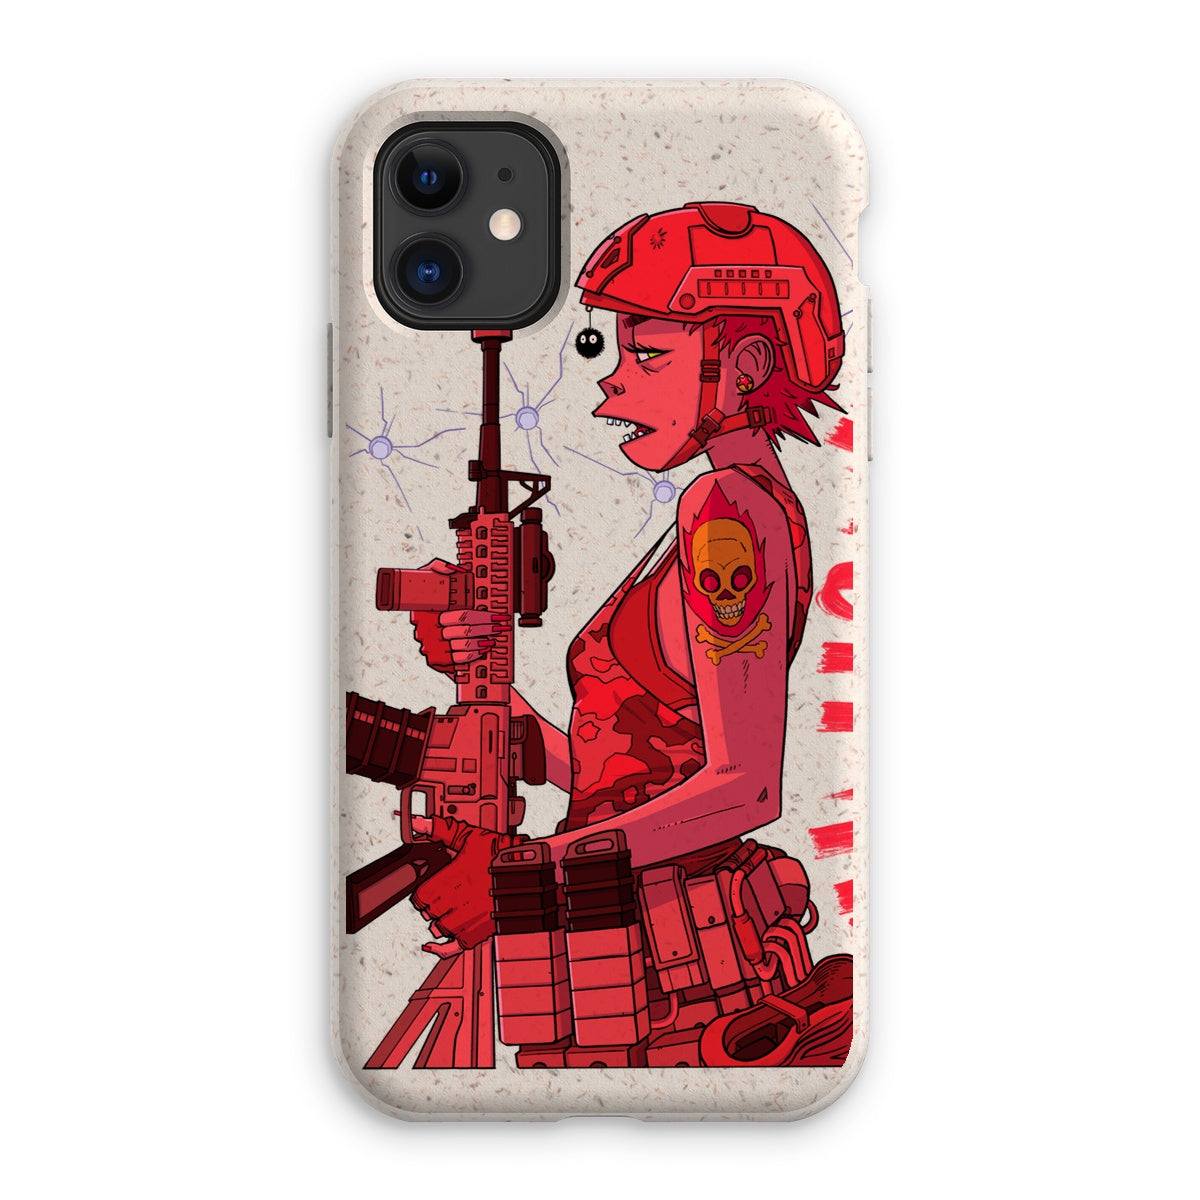 Unique and cool Gorillaz-style special forces phone case illustration